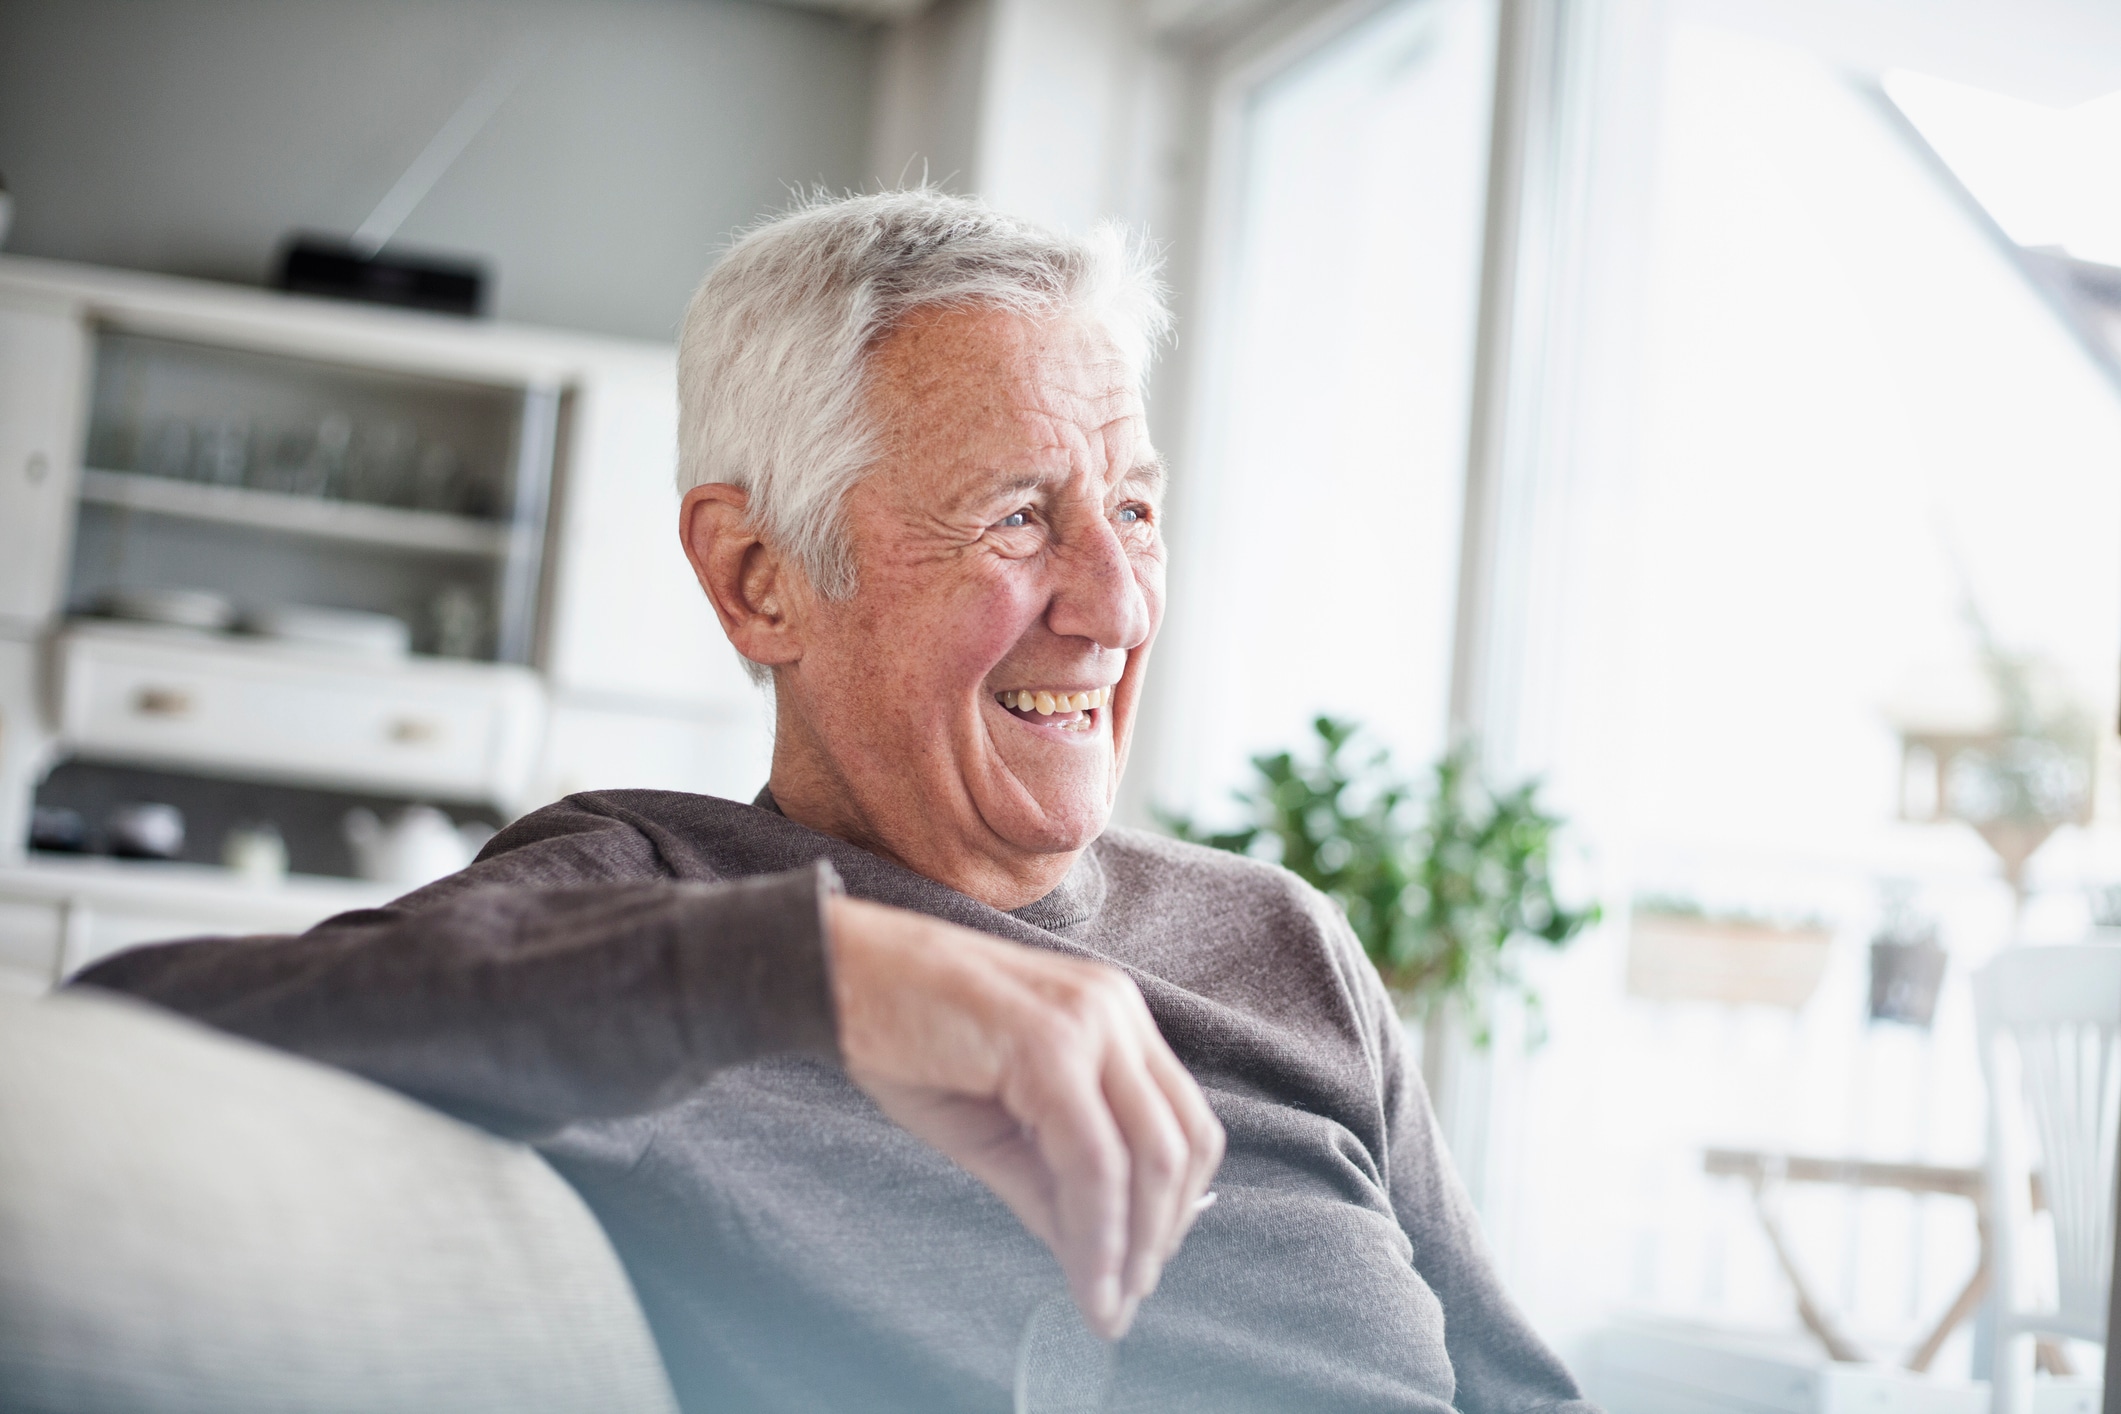 6 common dementia behaviors and how to manage them